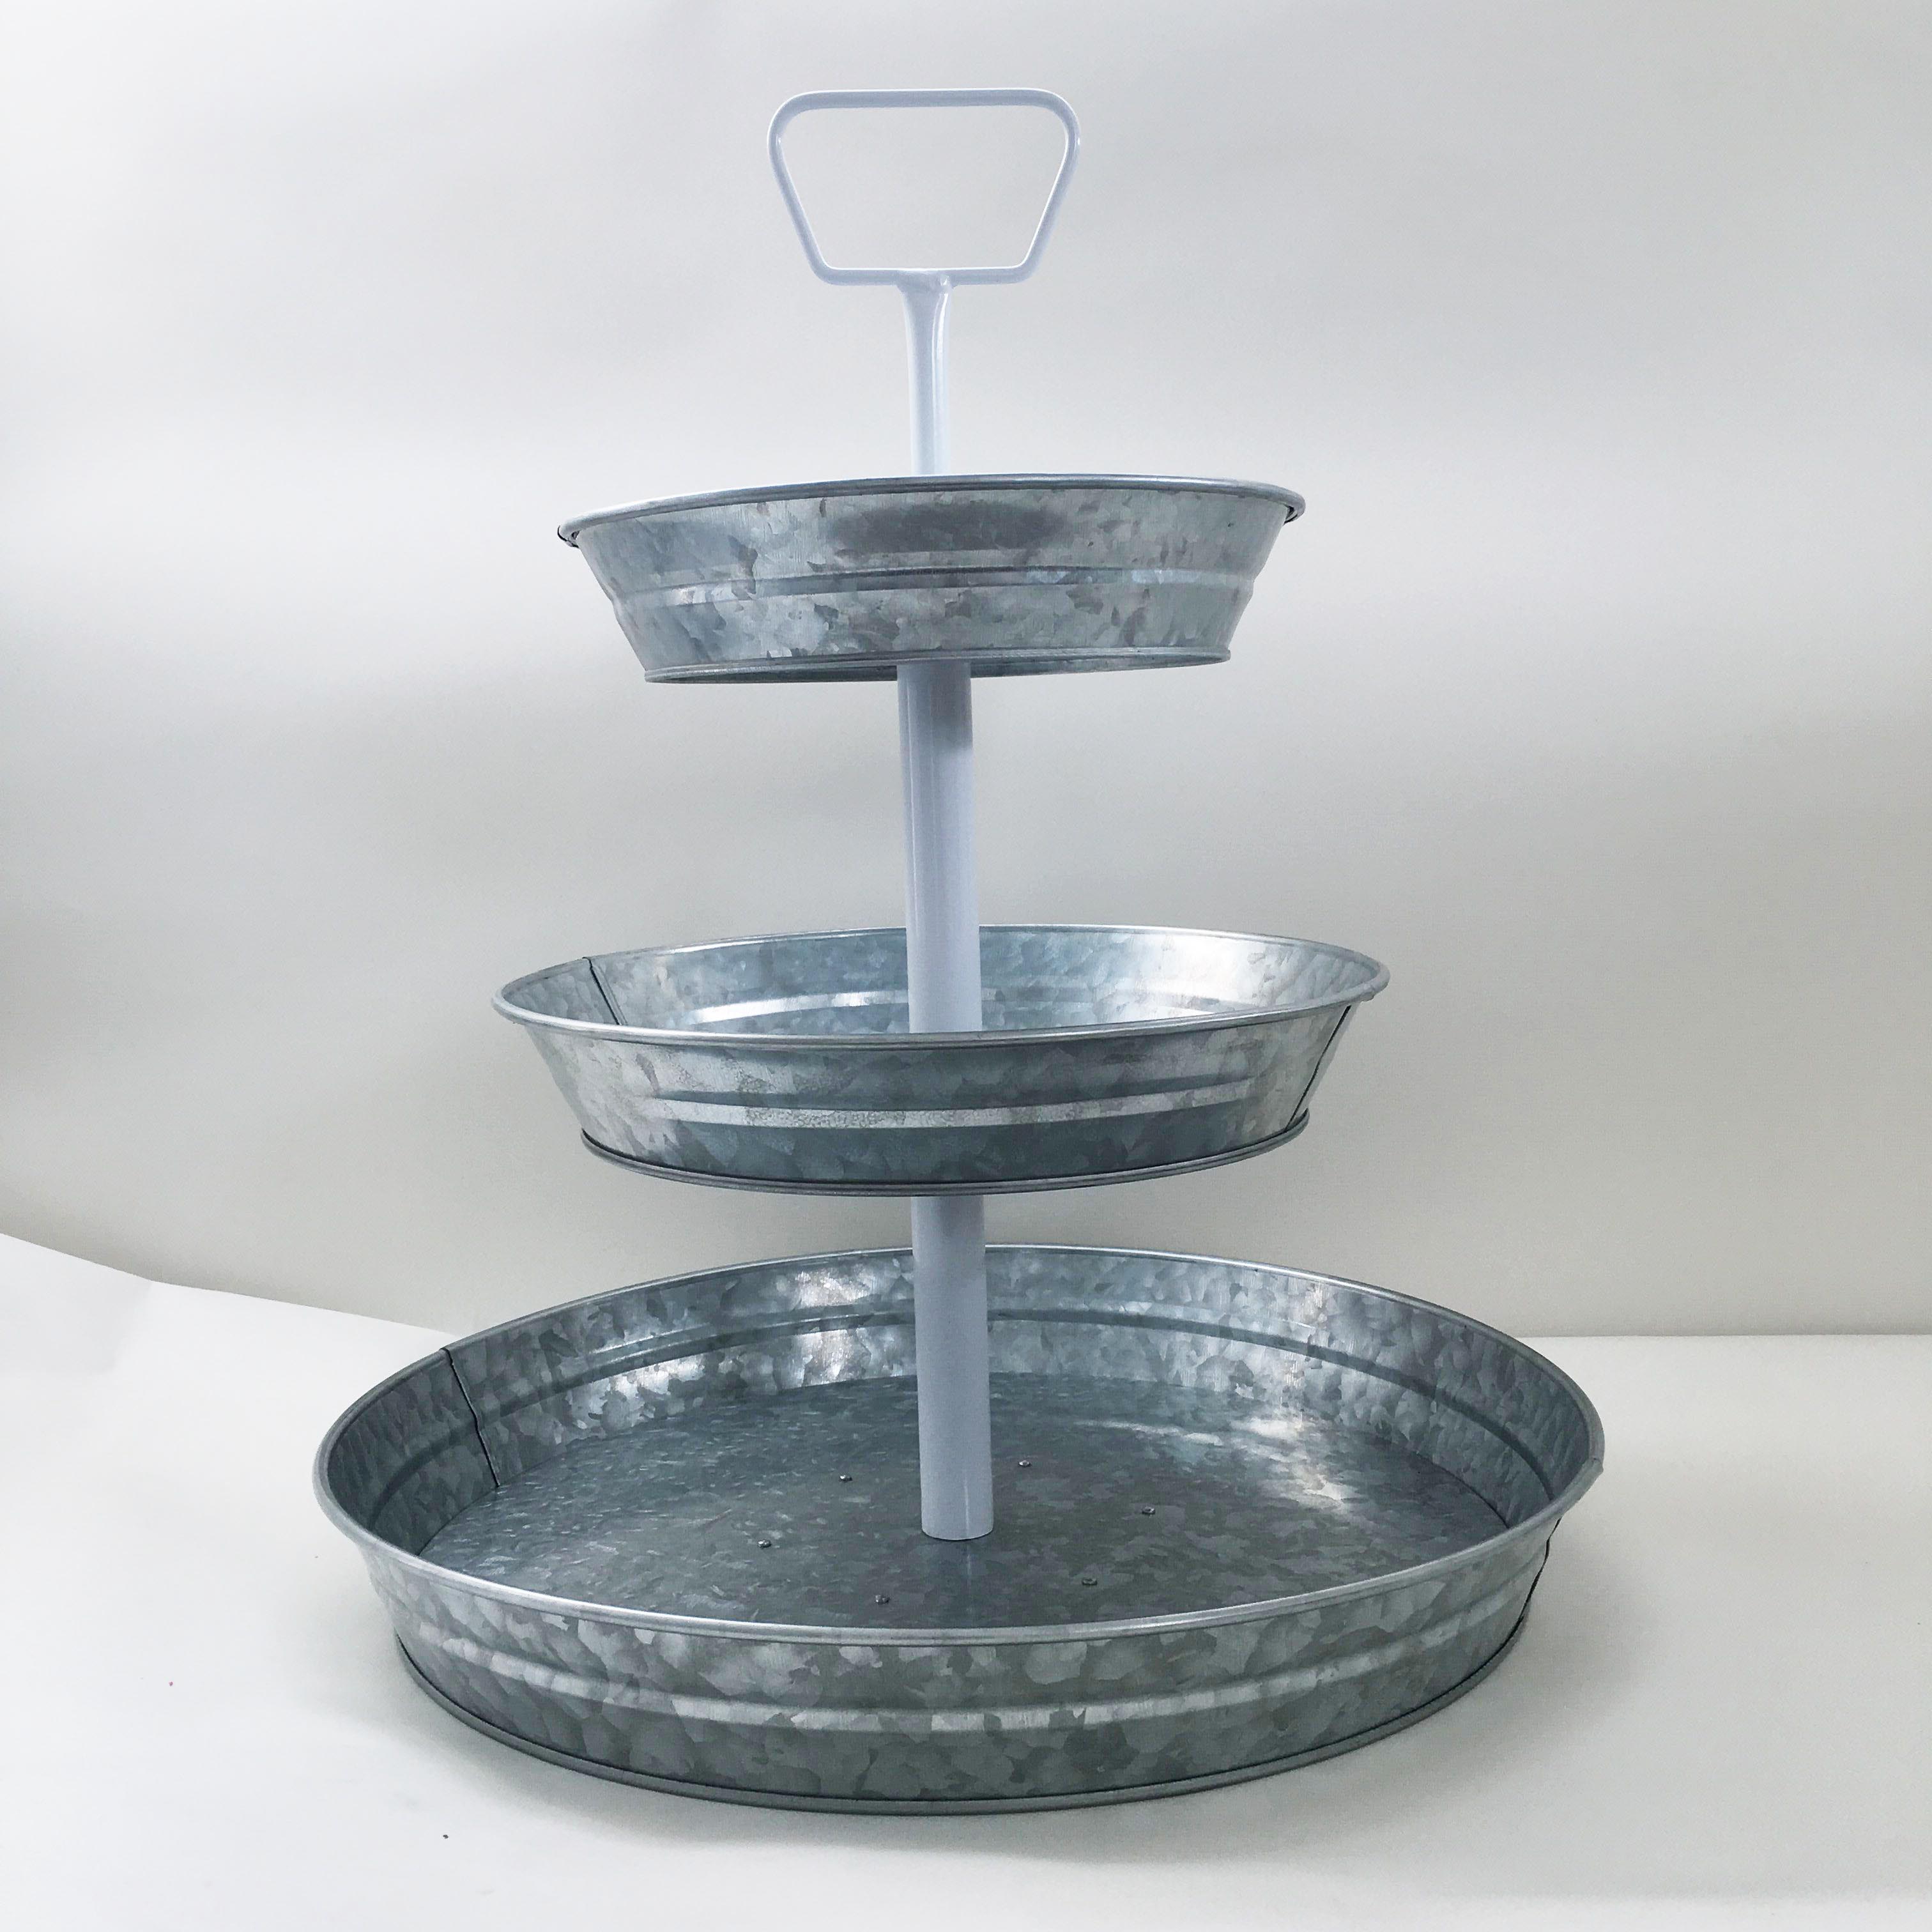  3 Tier Galvanized Round Serving Trays with White Handle